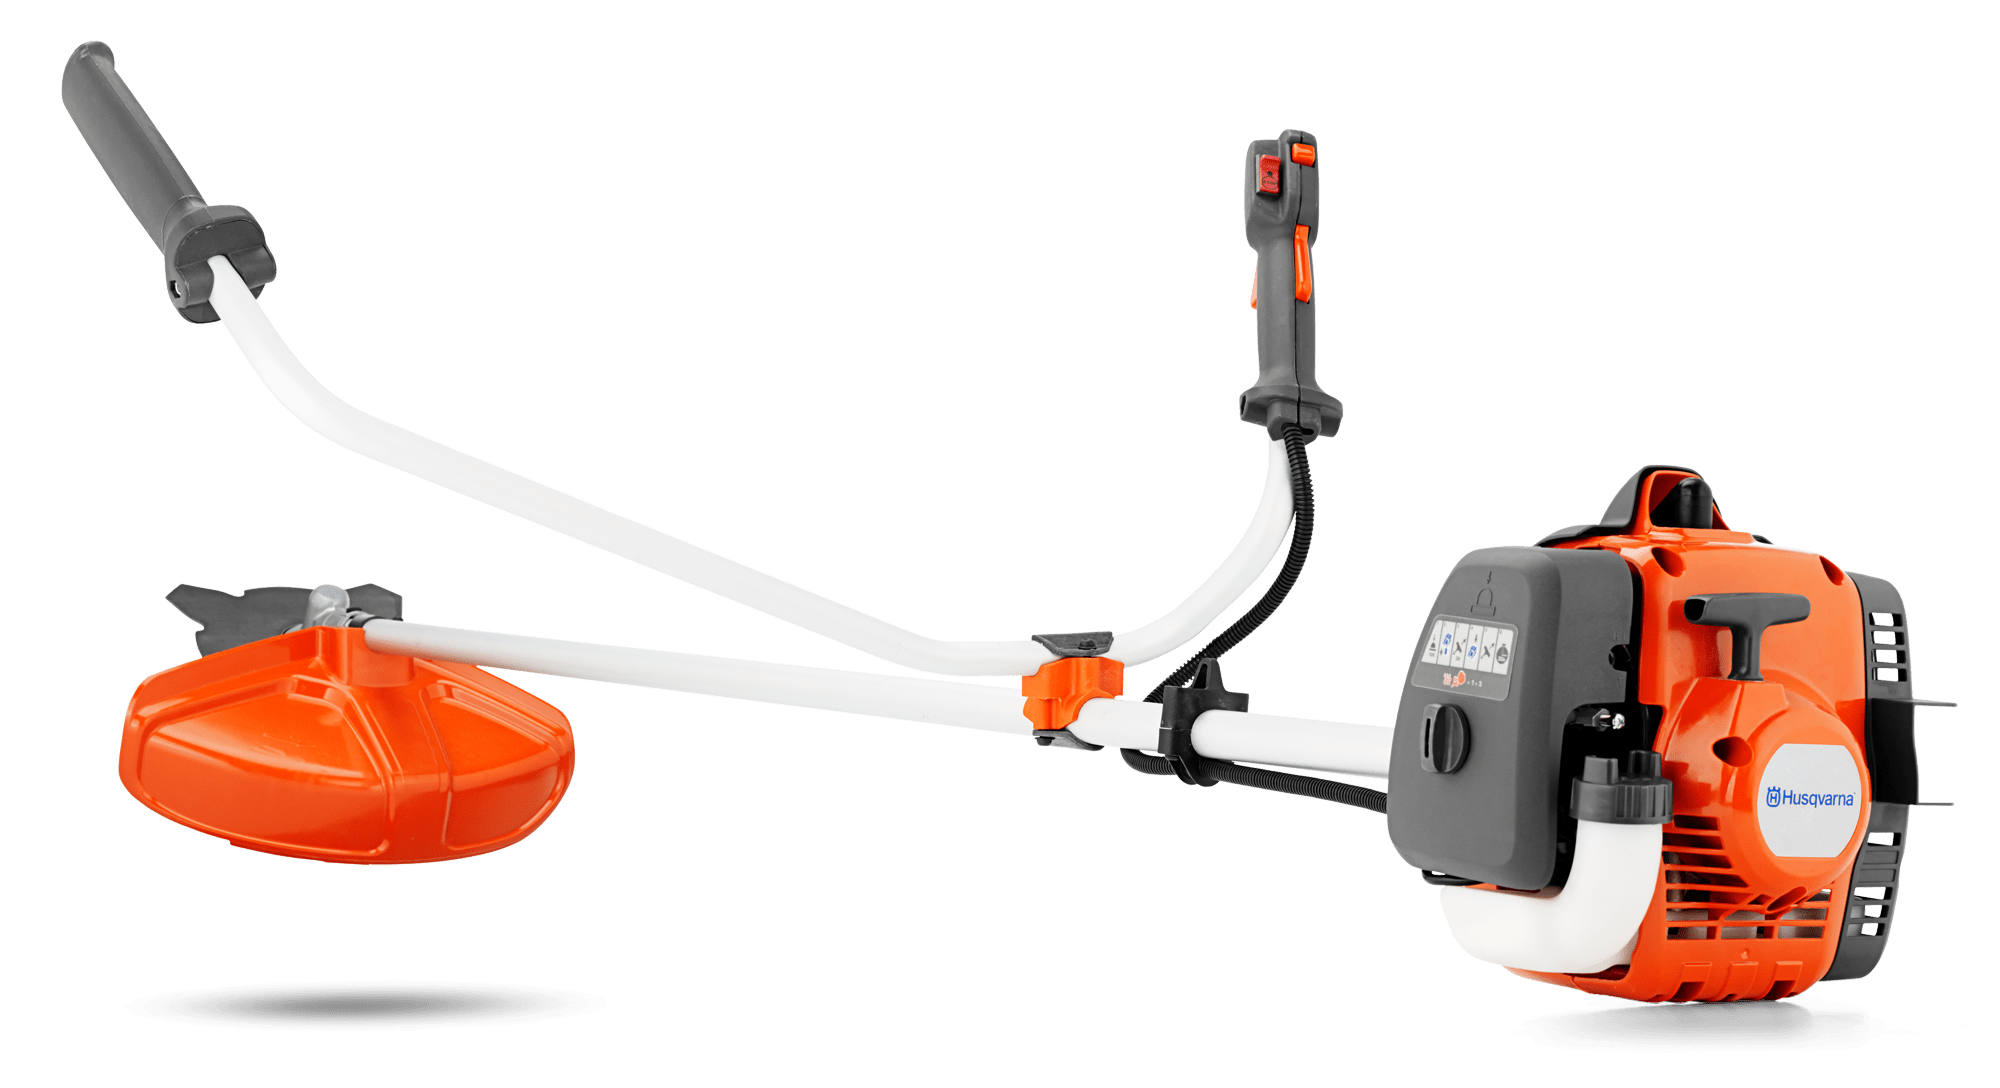 Petrol handheld Brushcutter 122R, 129R with grass blade